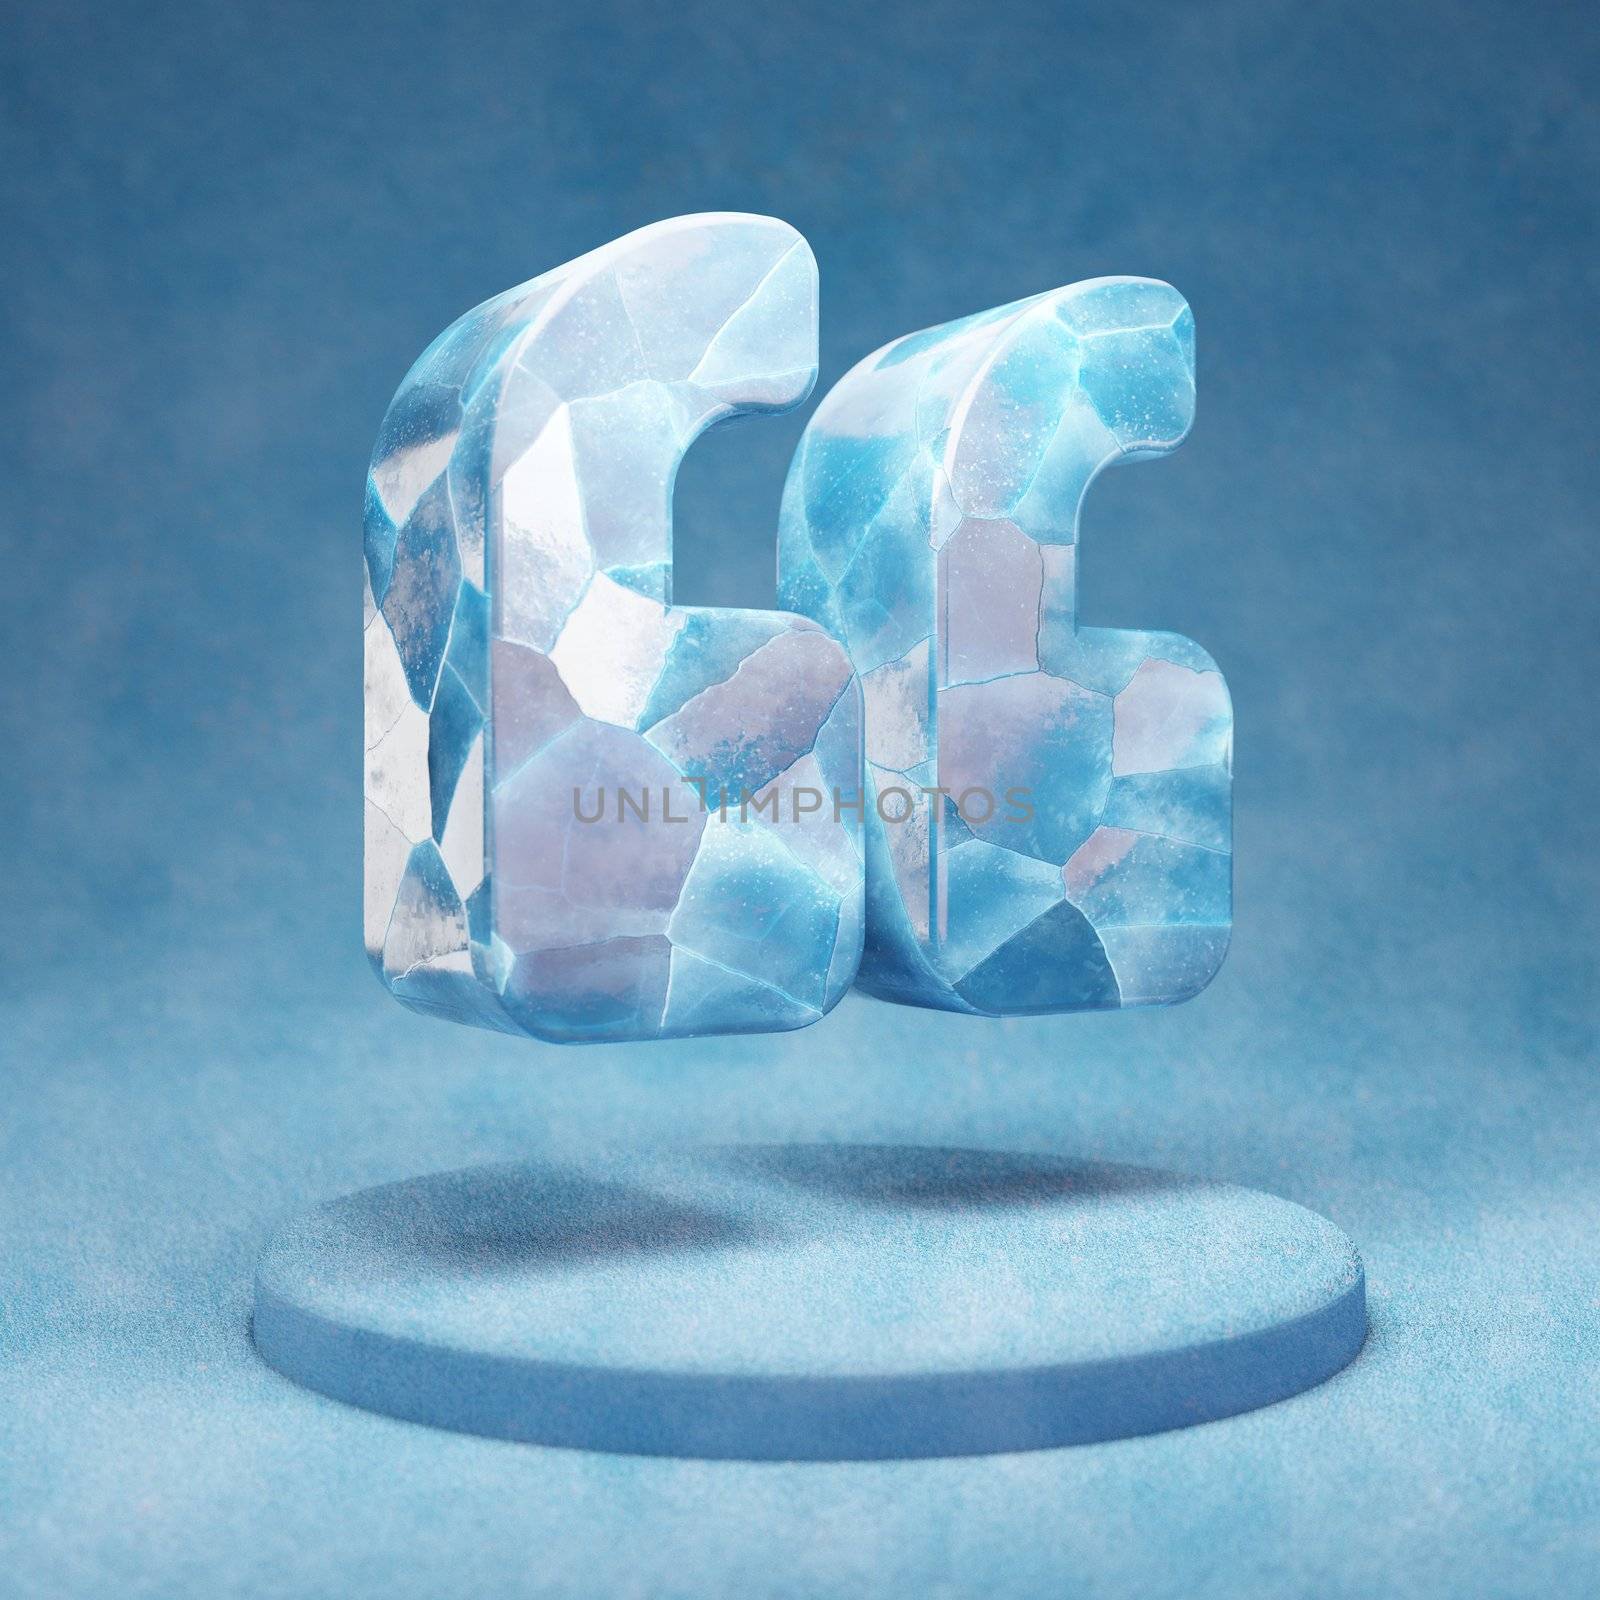 Quote Left icon. Cracked blue Ice Quote Left symbol on blue snow podium. Social Media Icon for website, presentation, design template element. 3D render.